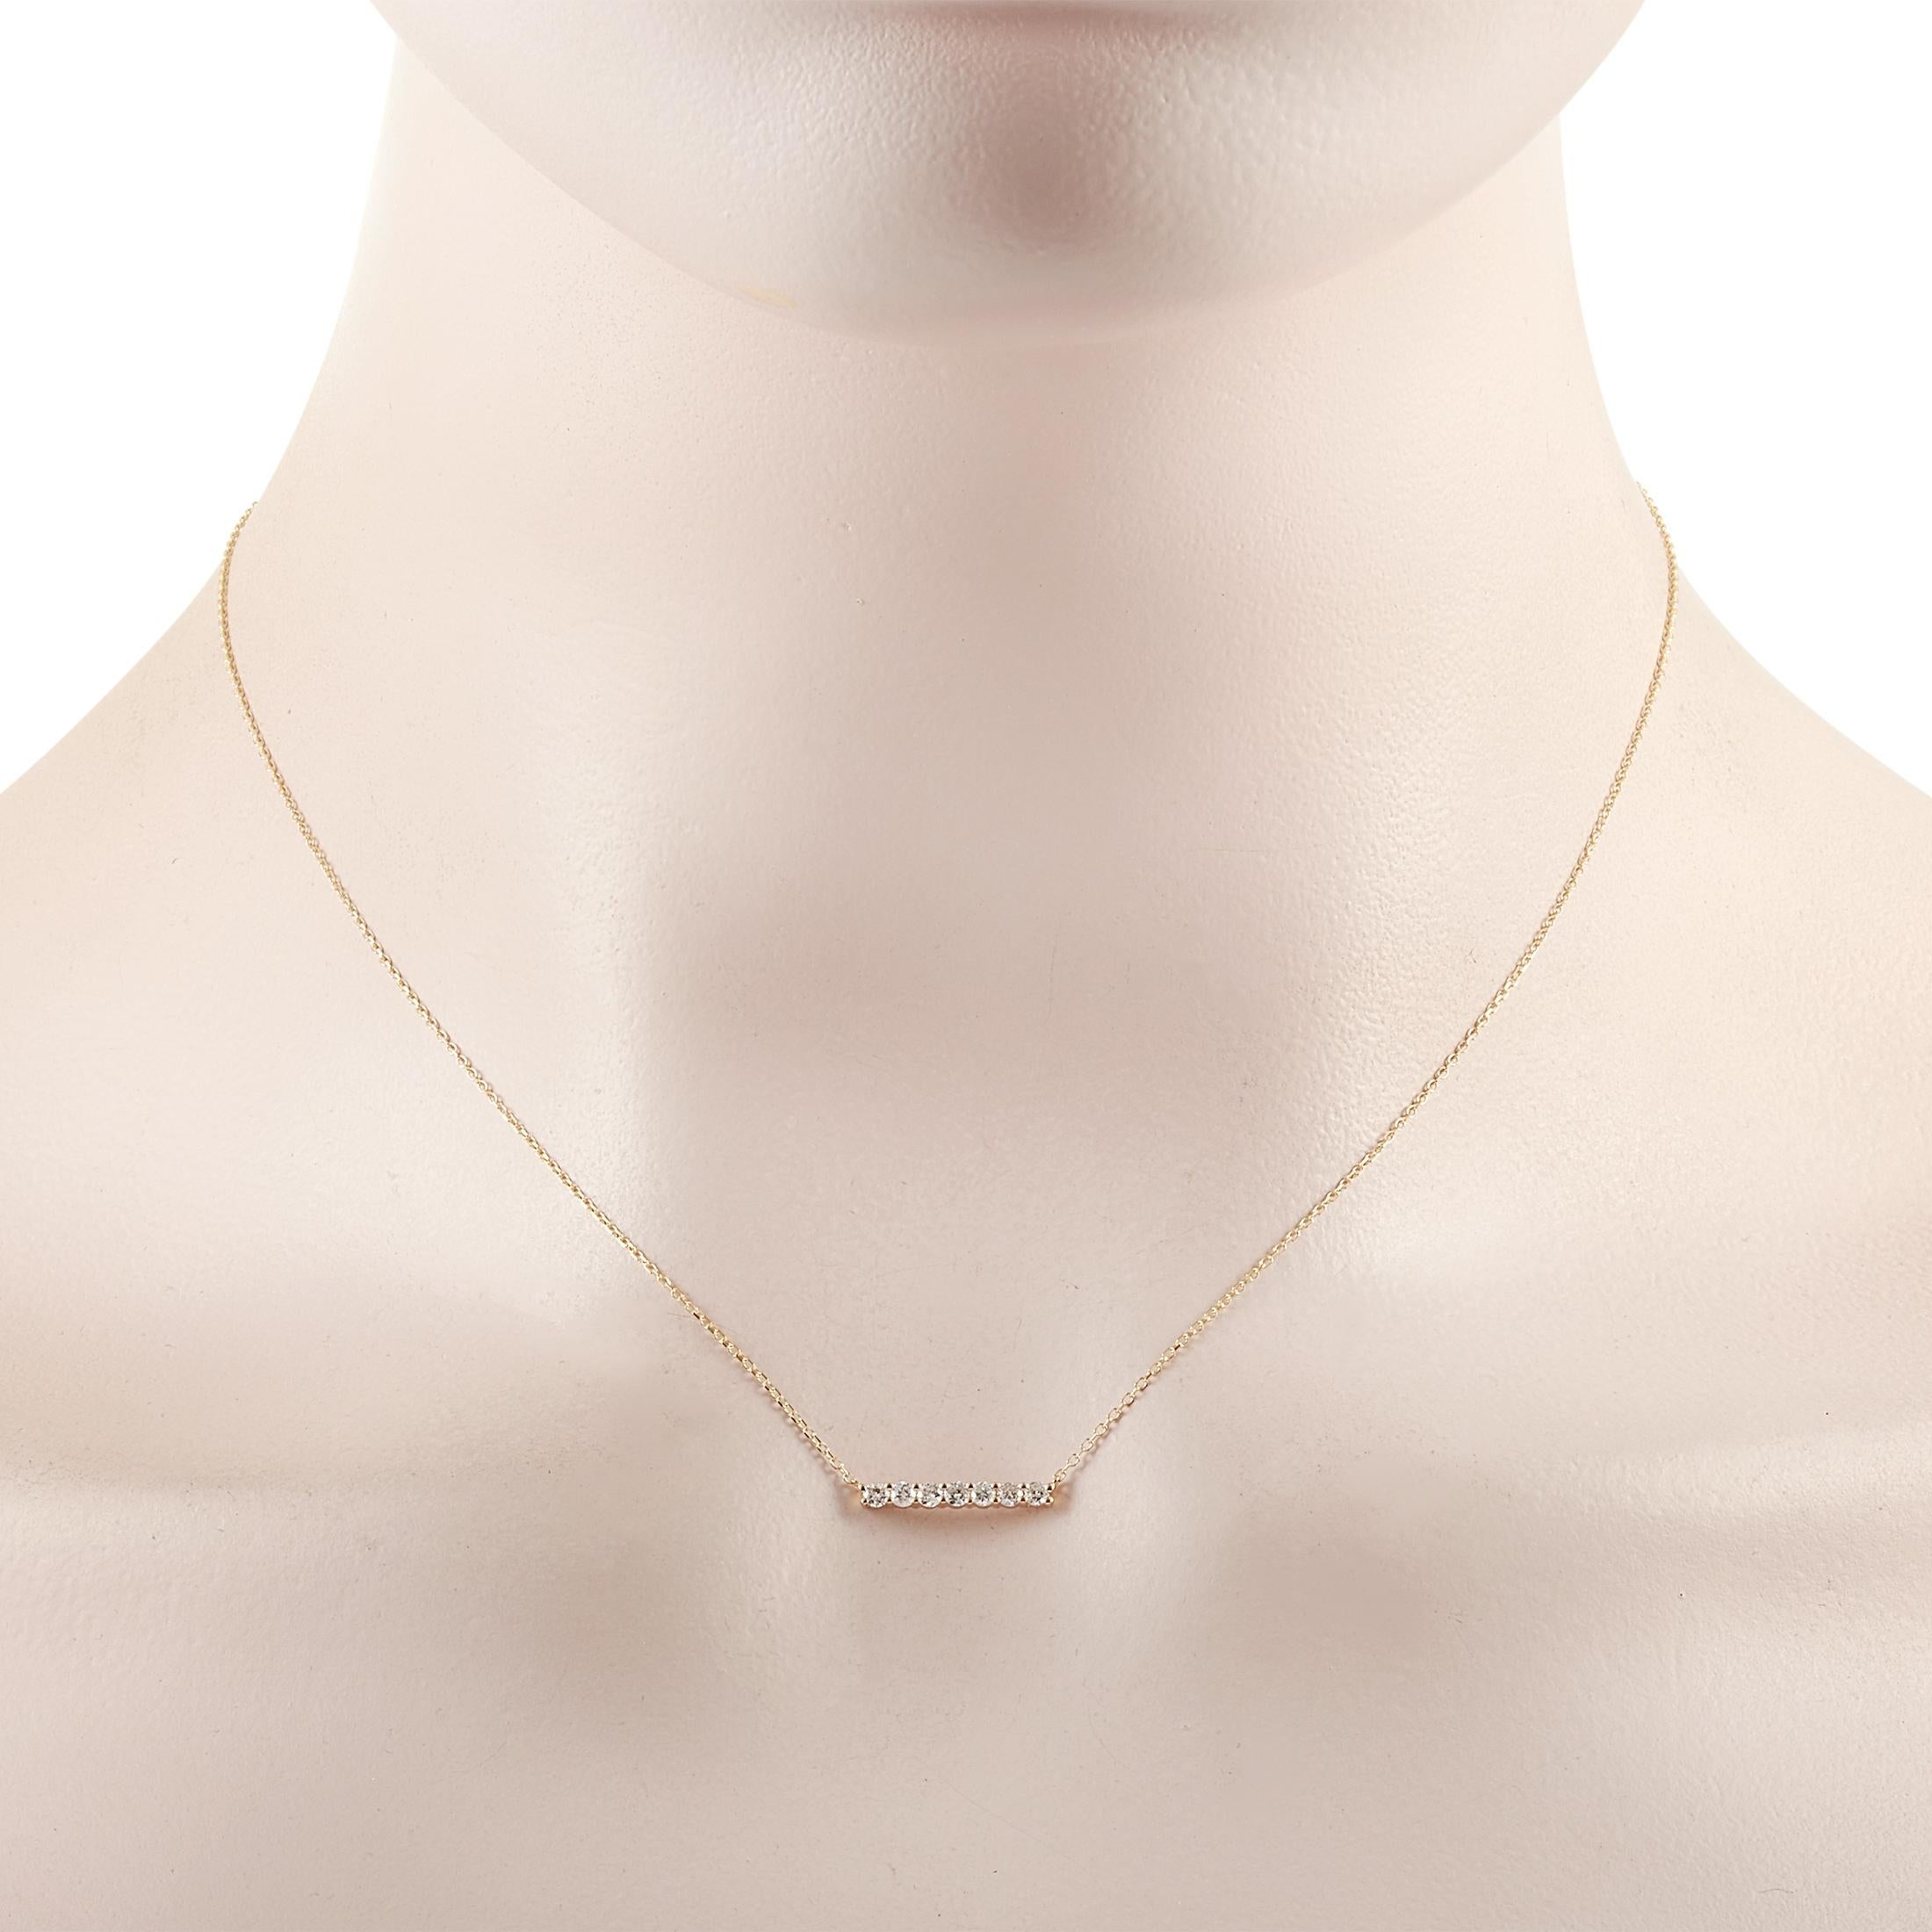 This LB Exclusive necklace is crafted from 14K yellow gold and weighs 1.4 grams. It is presented with a 15” chain and boasts a pendant that measures 0.13” in length and 0.50” in width. The necklace is set with diamonds that total 0.25 carats.
 
